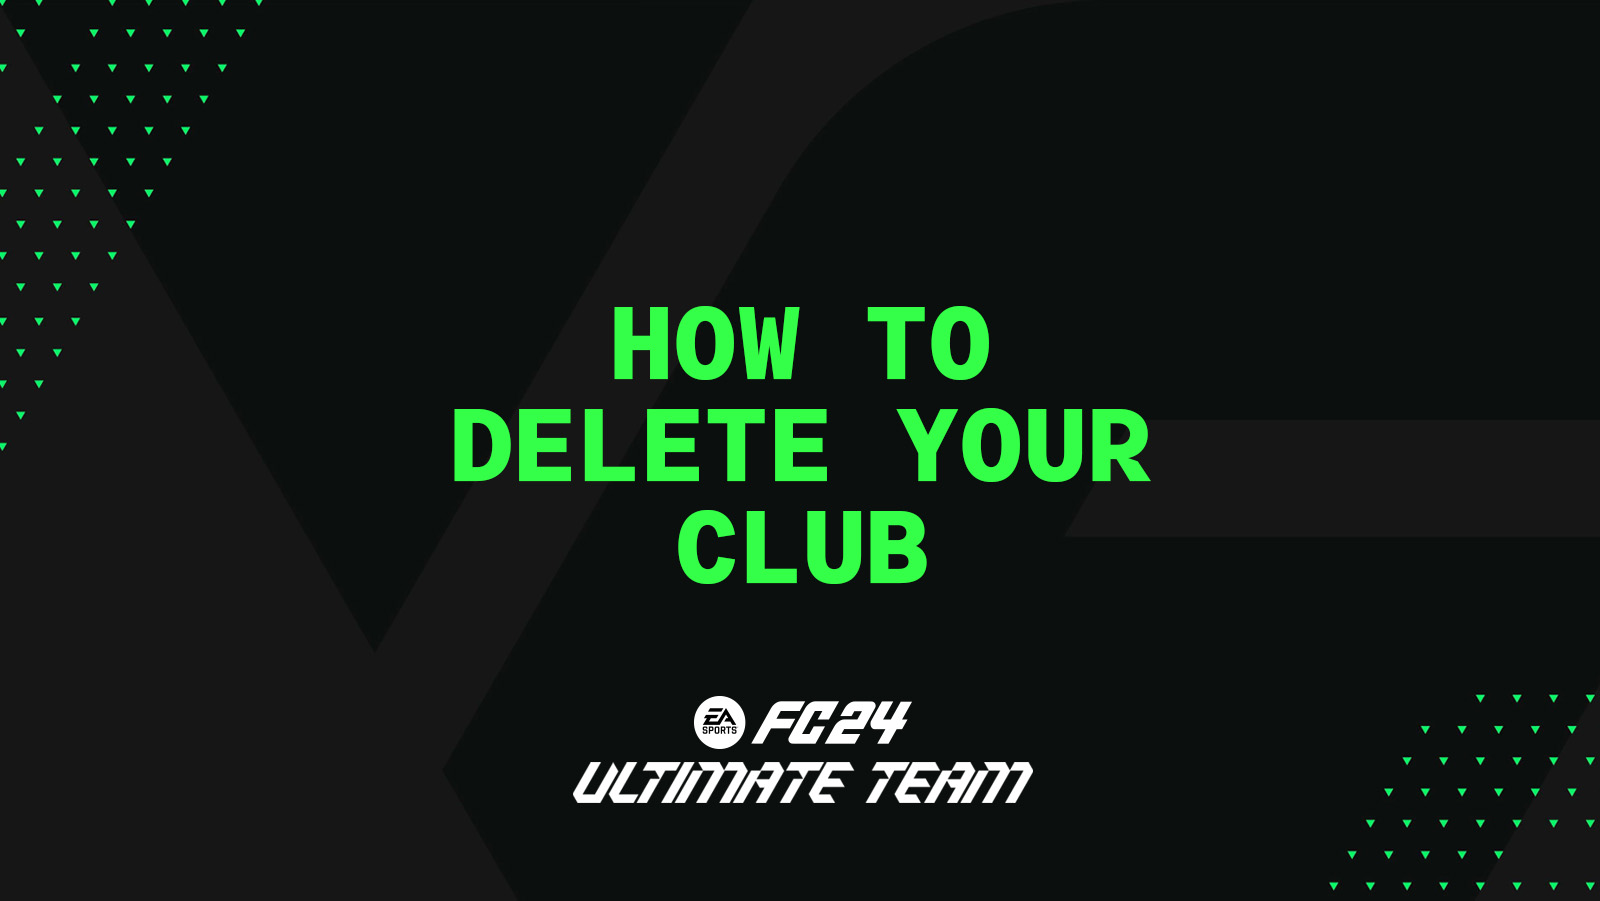 FC 24 Ultimate Team - Remove Your Club